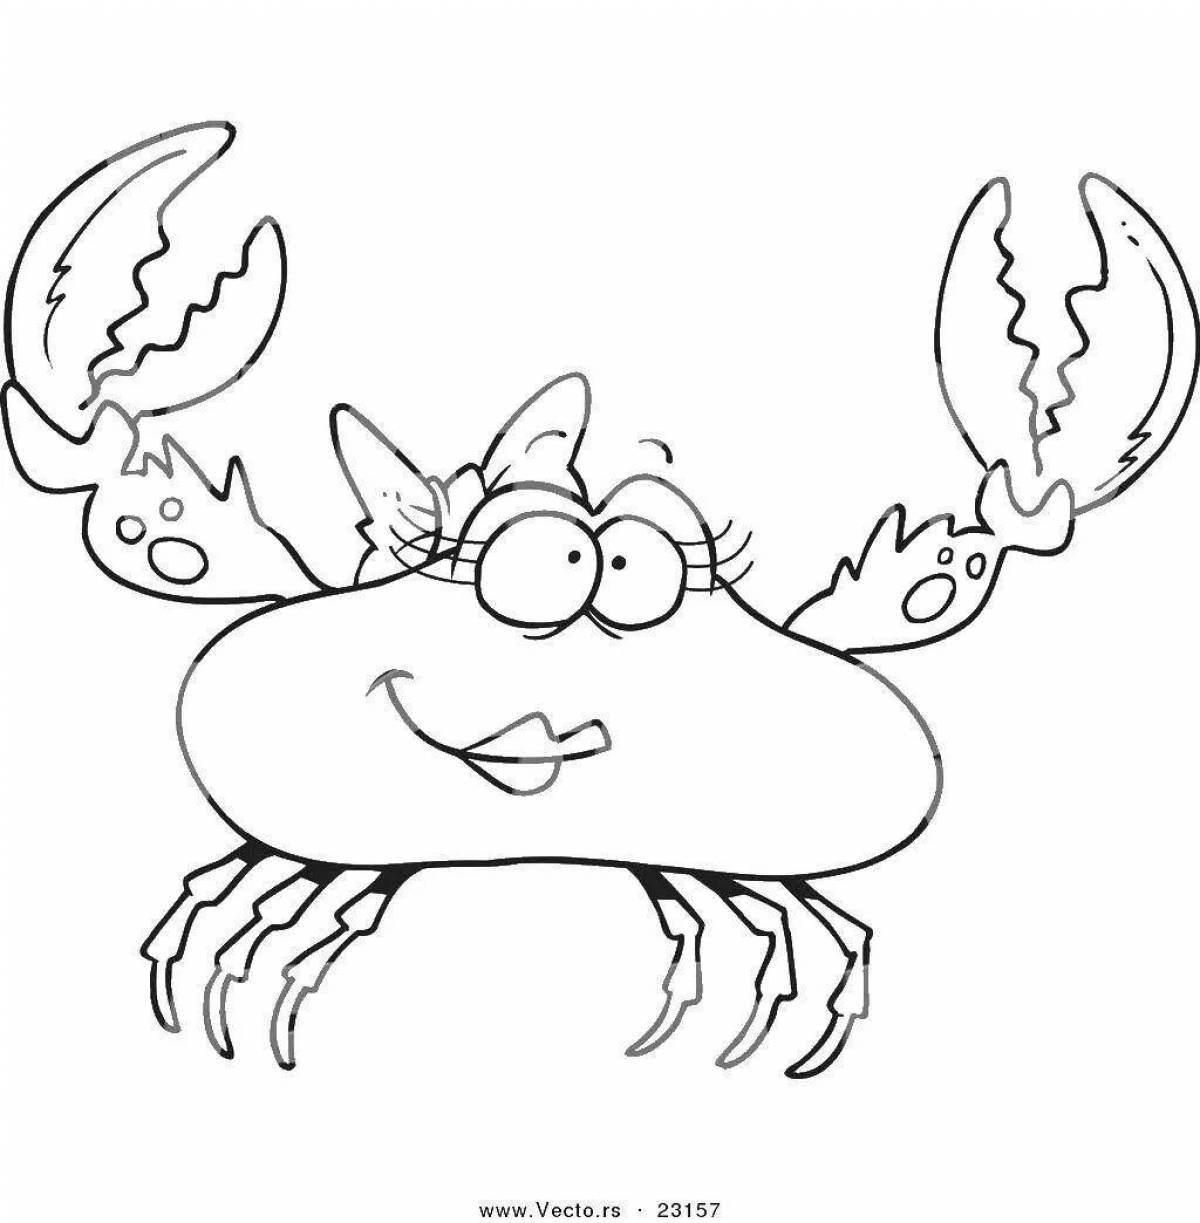 Coloring page glorious captain crab